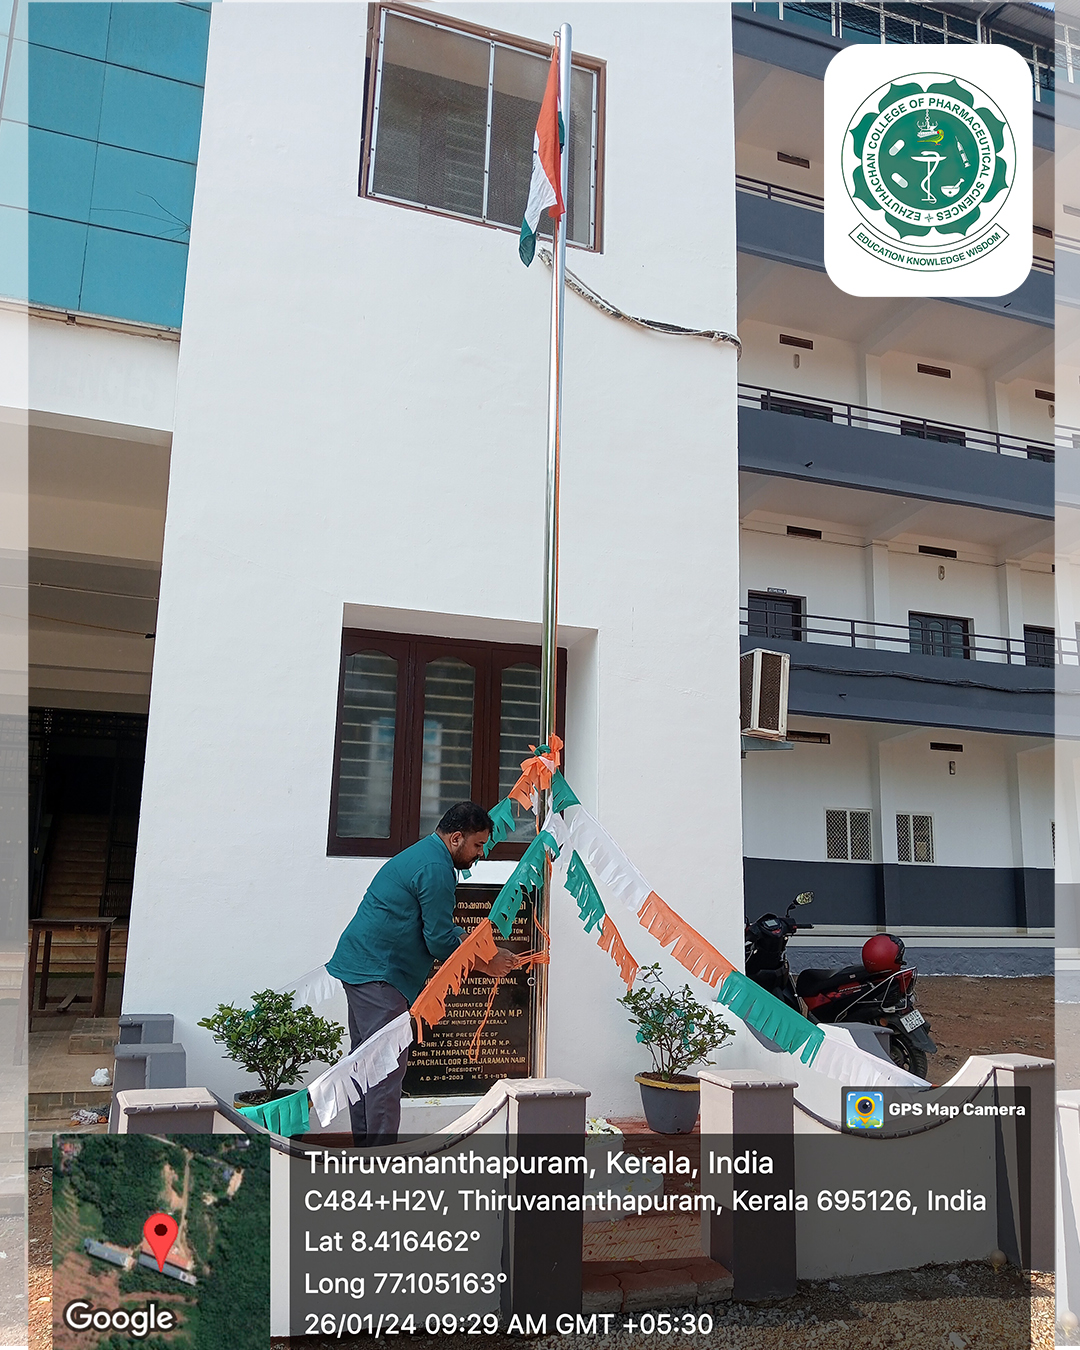 Flag hosting and distribution of sweets on 75th Republic day at ECPS by NSS Unit